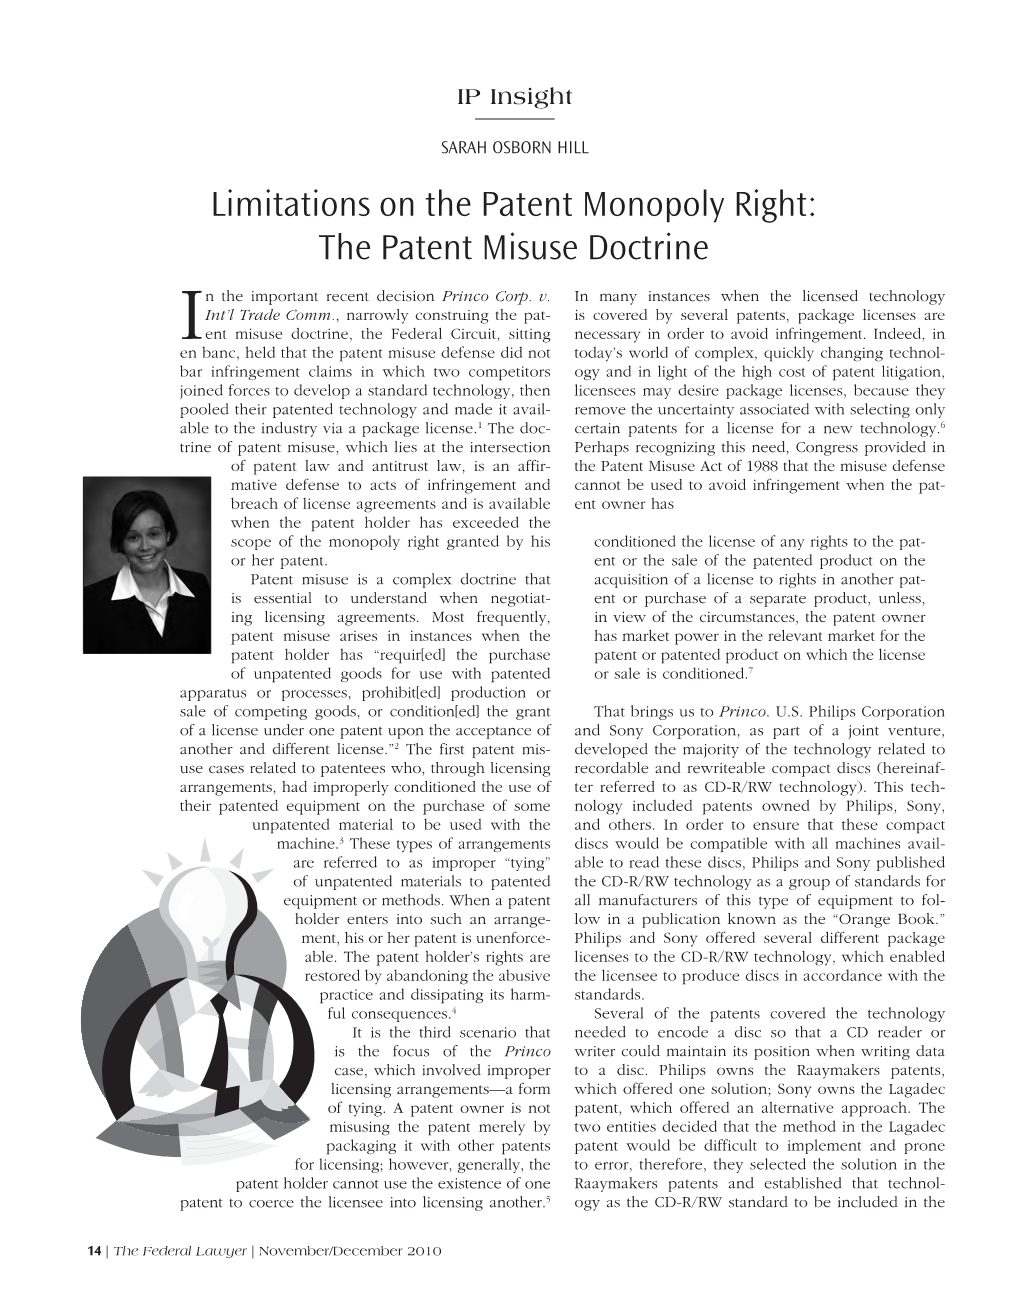 Limitations on the Patent Monopoly Right: the Patent Misuse Doctrine